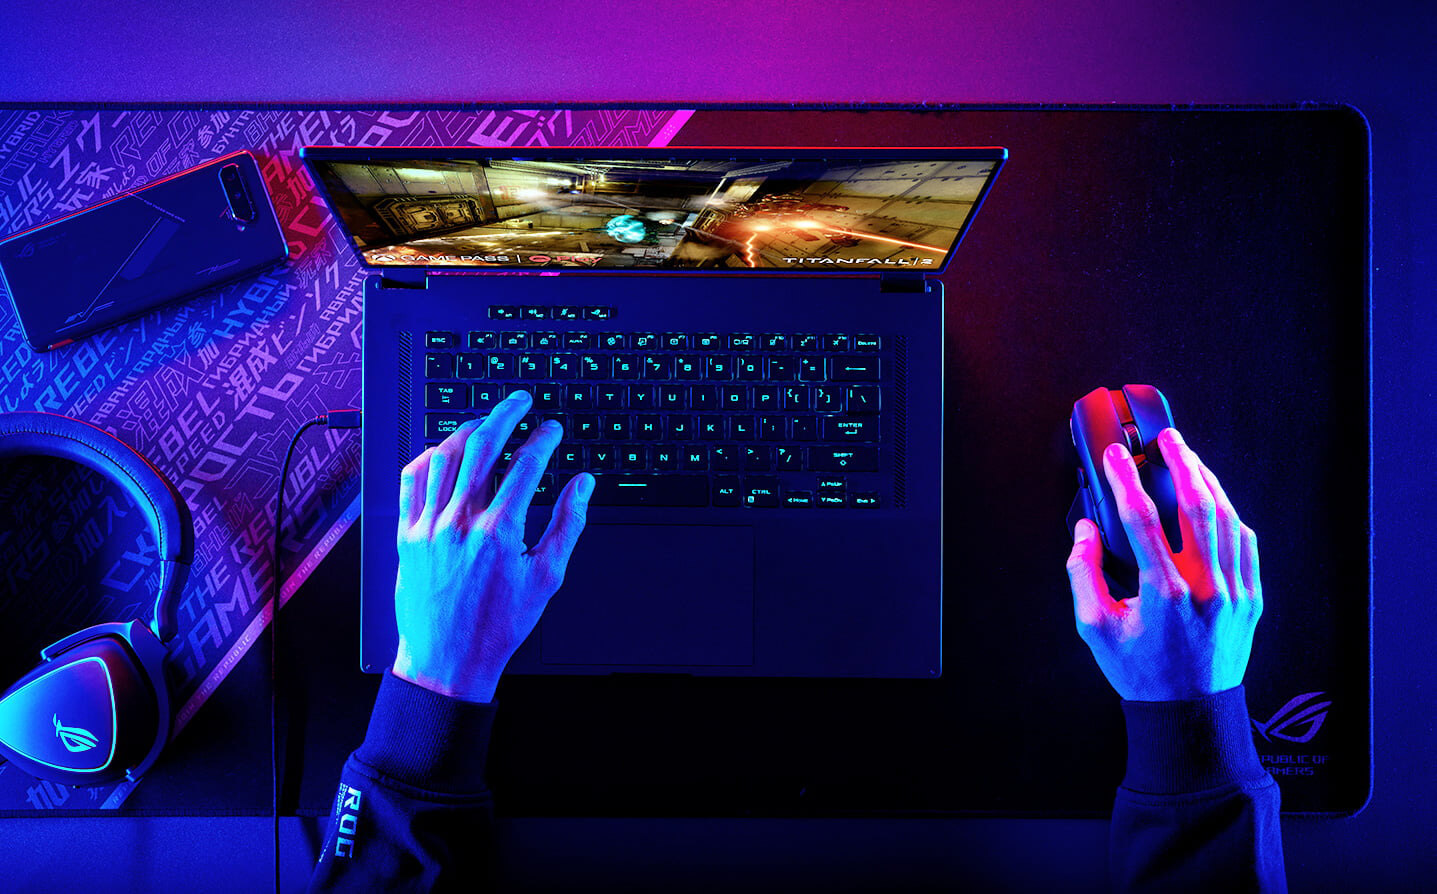 Scenario image PC gaming with mouse